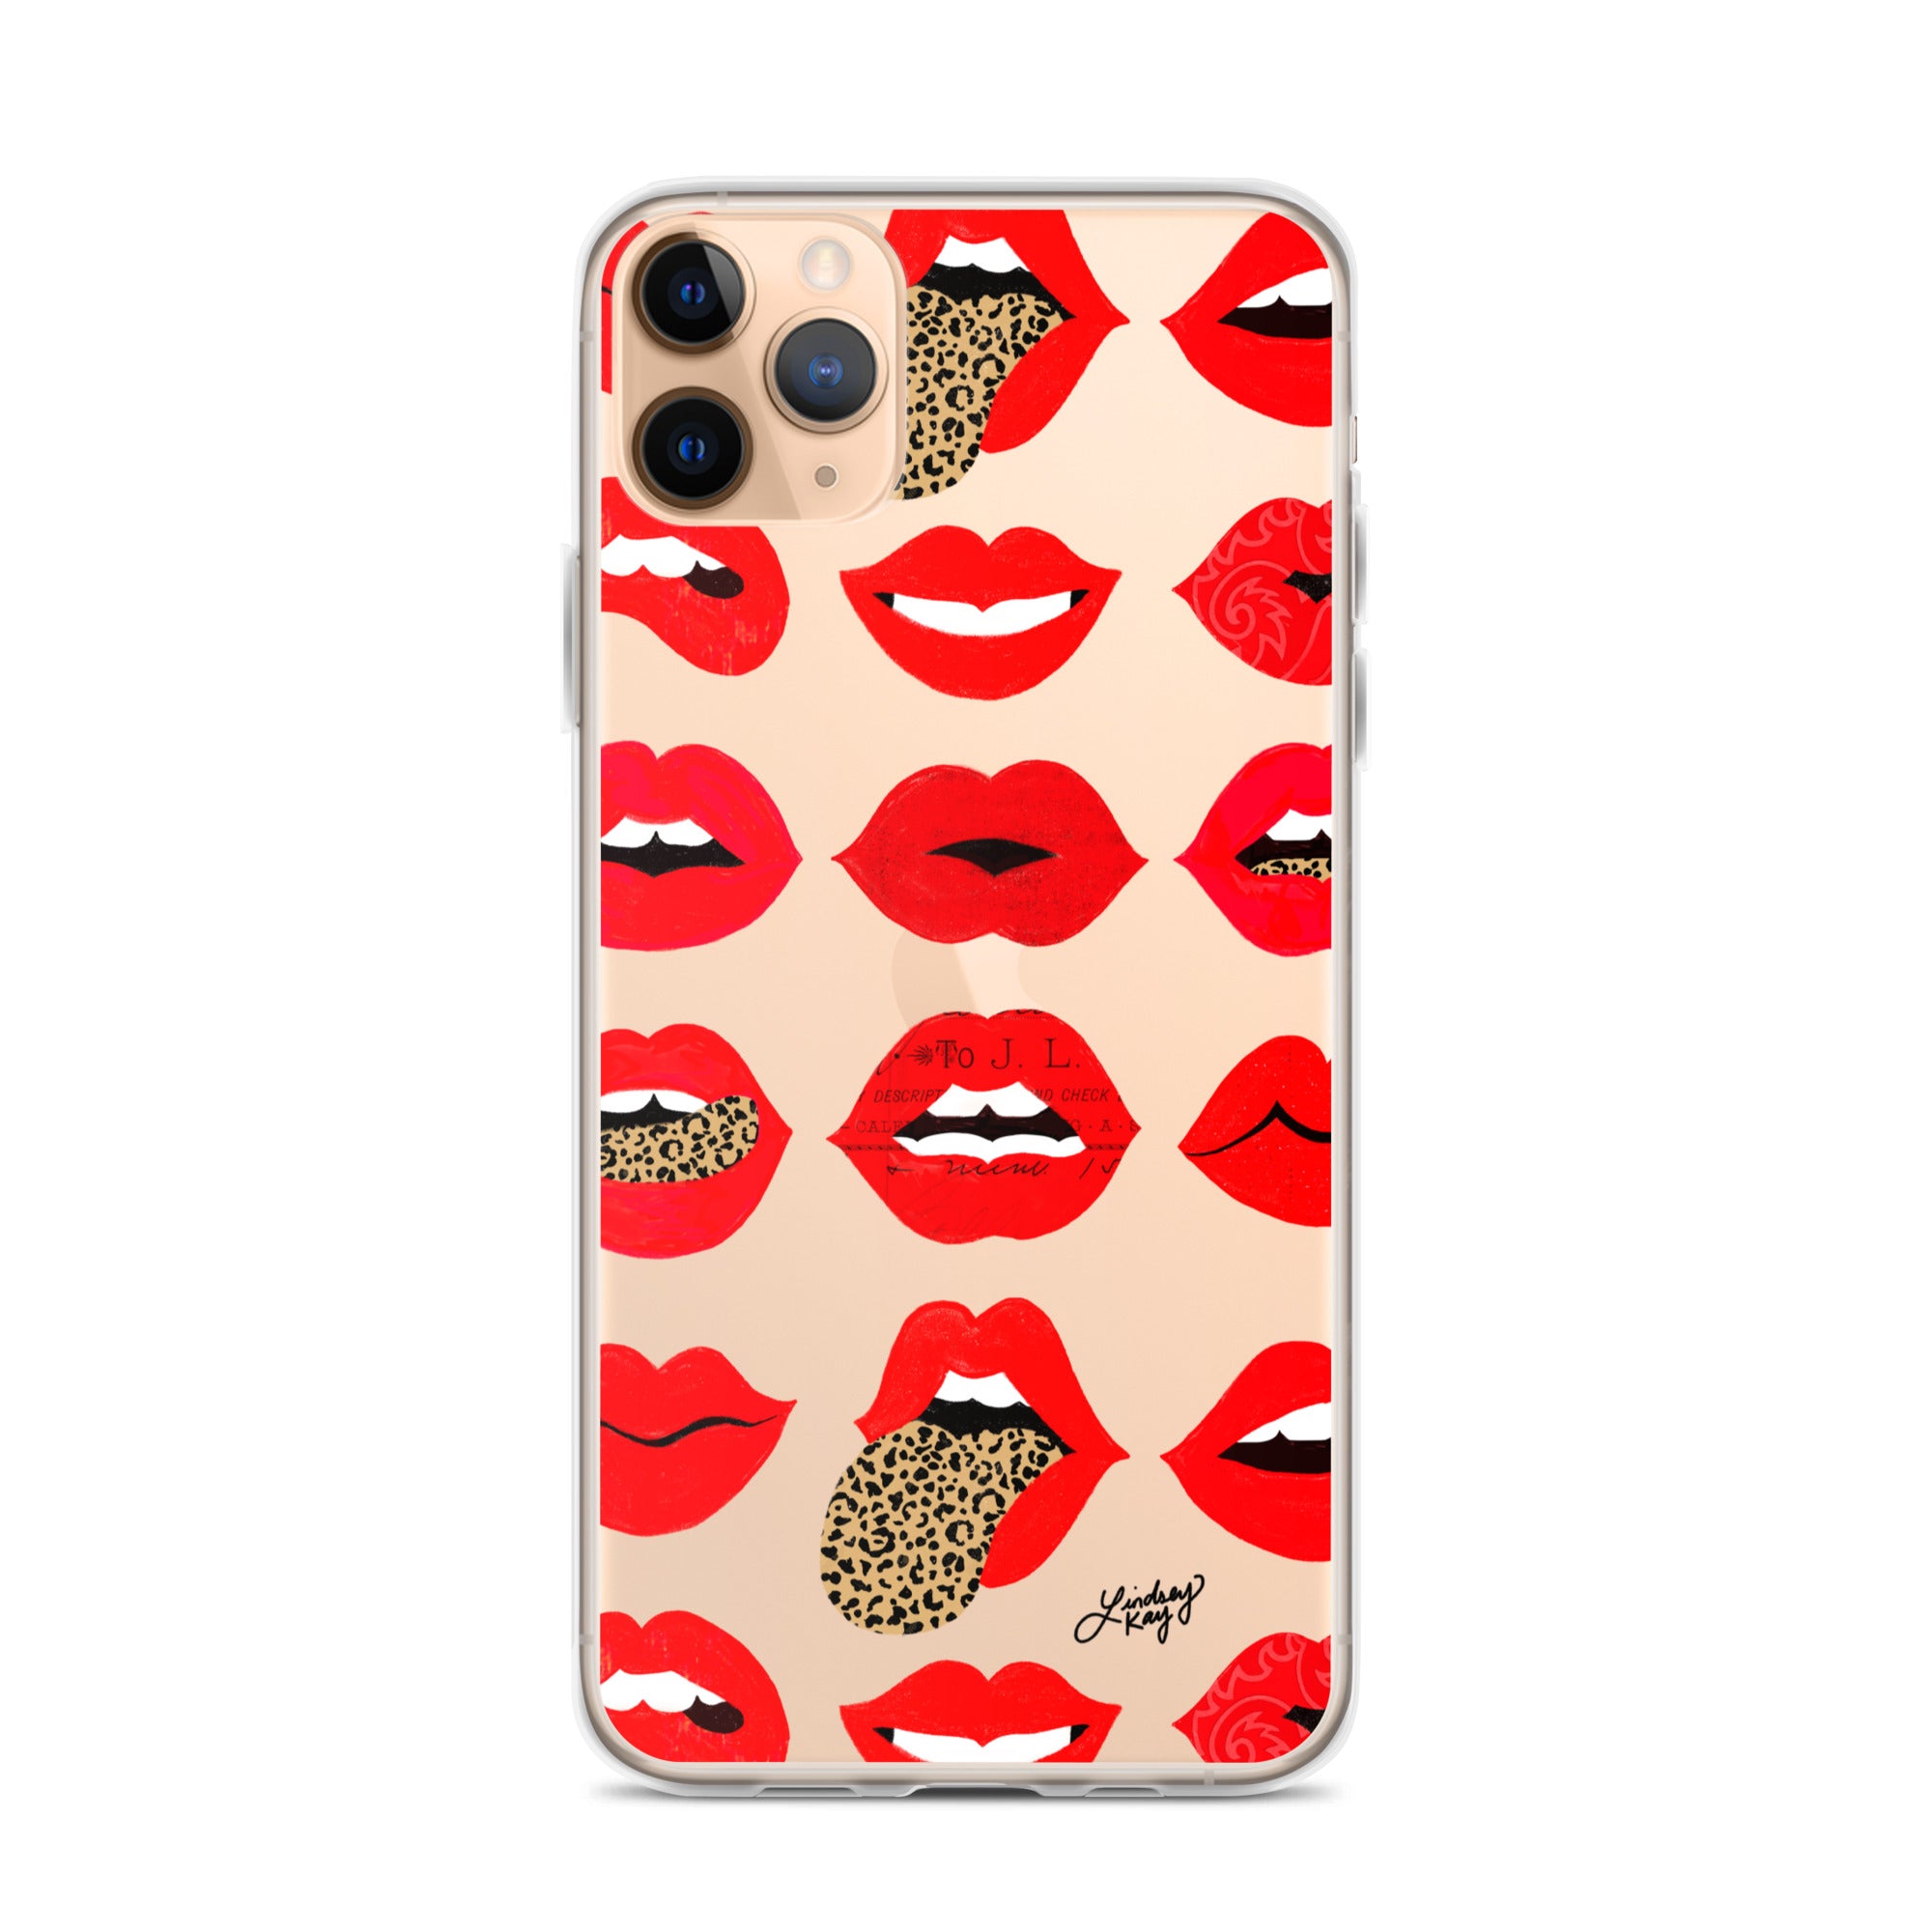 Leopard print lips of love red pattern kiss makeup trendy pop-art iPhone phone case cover clear protective mobile accessories Lindsey Kay collective 